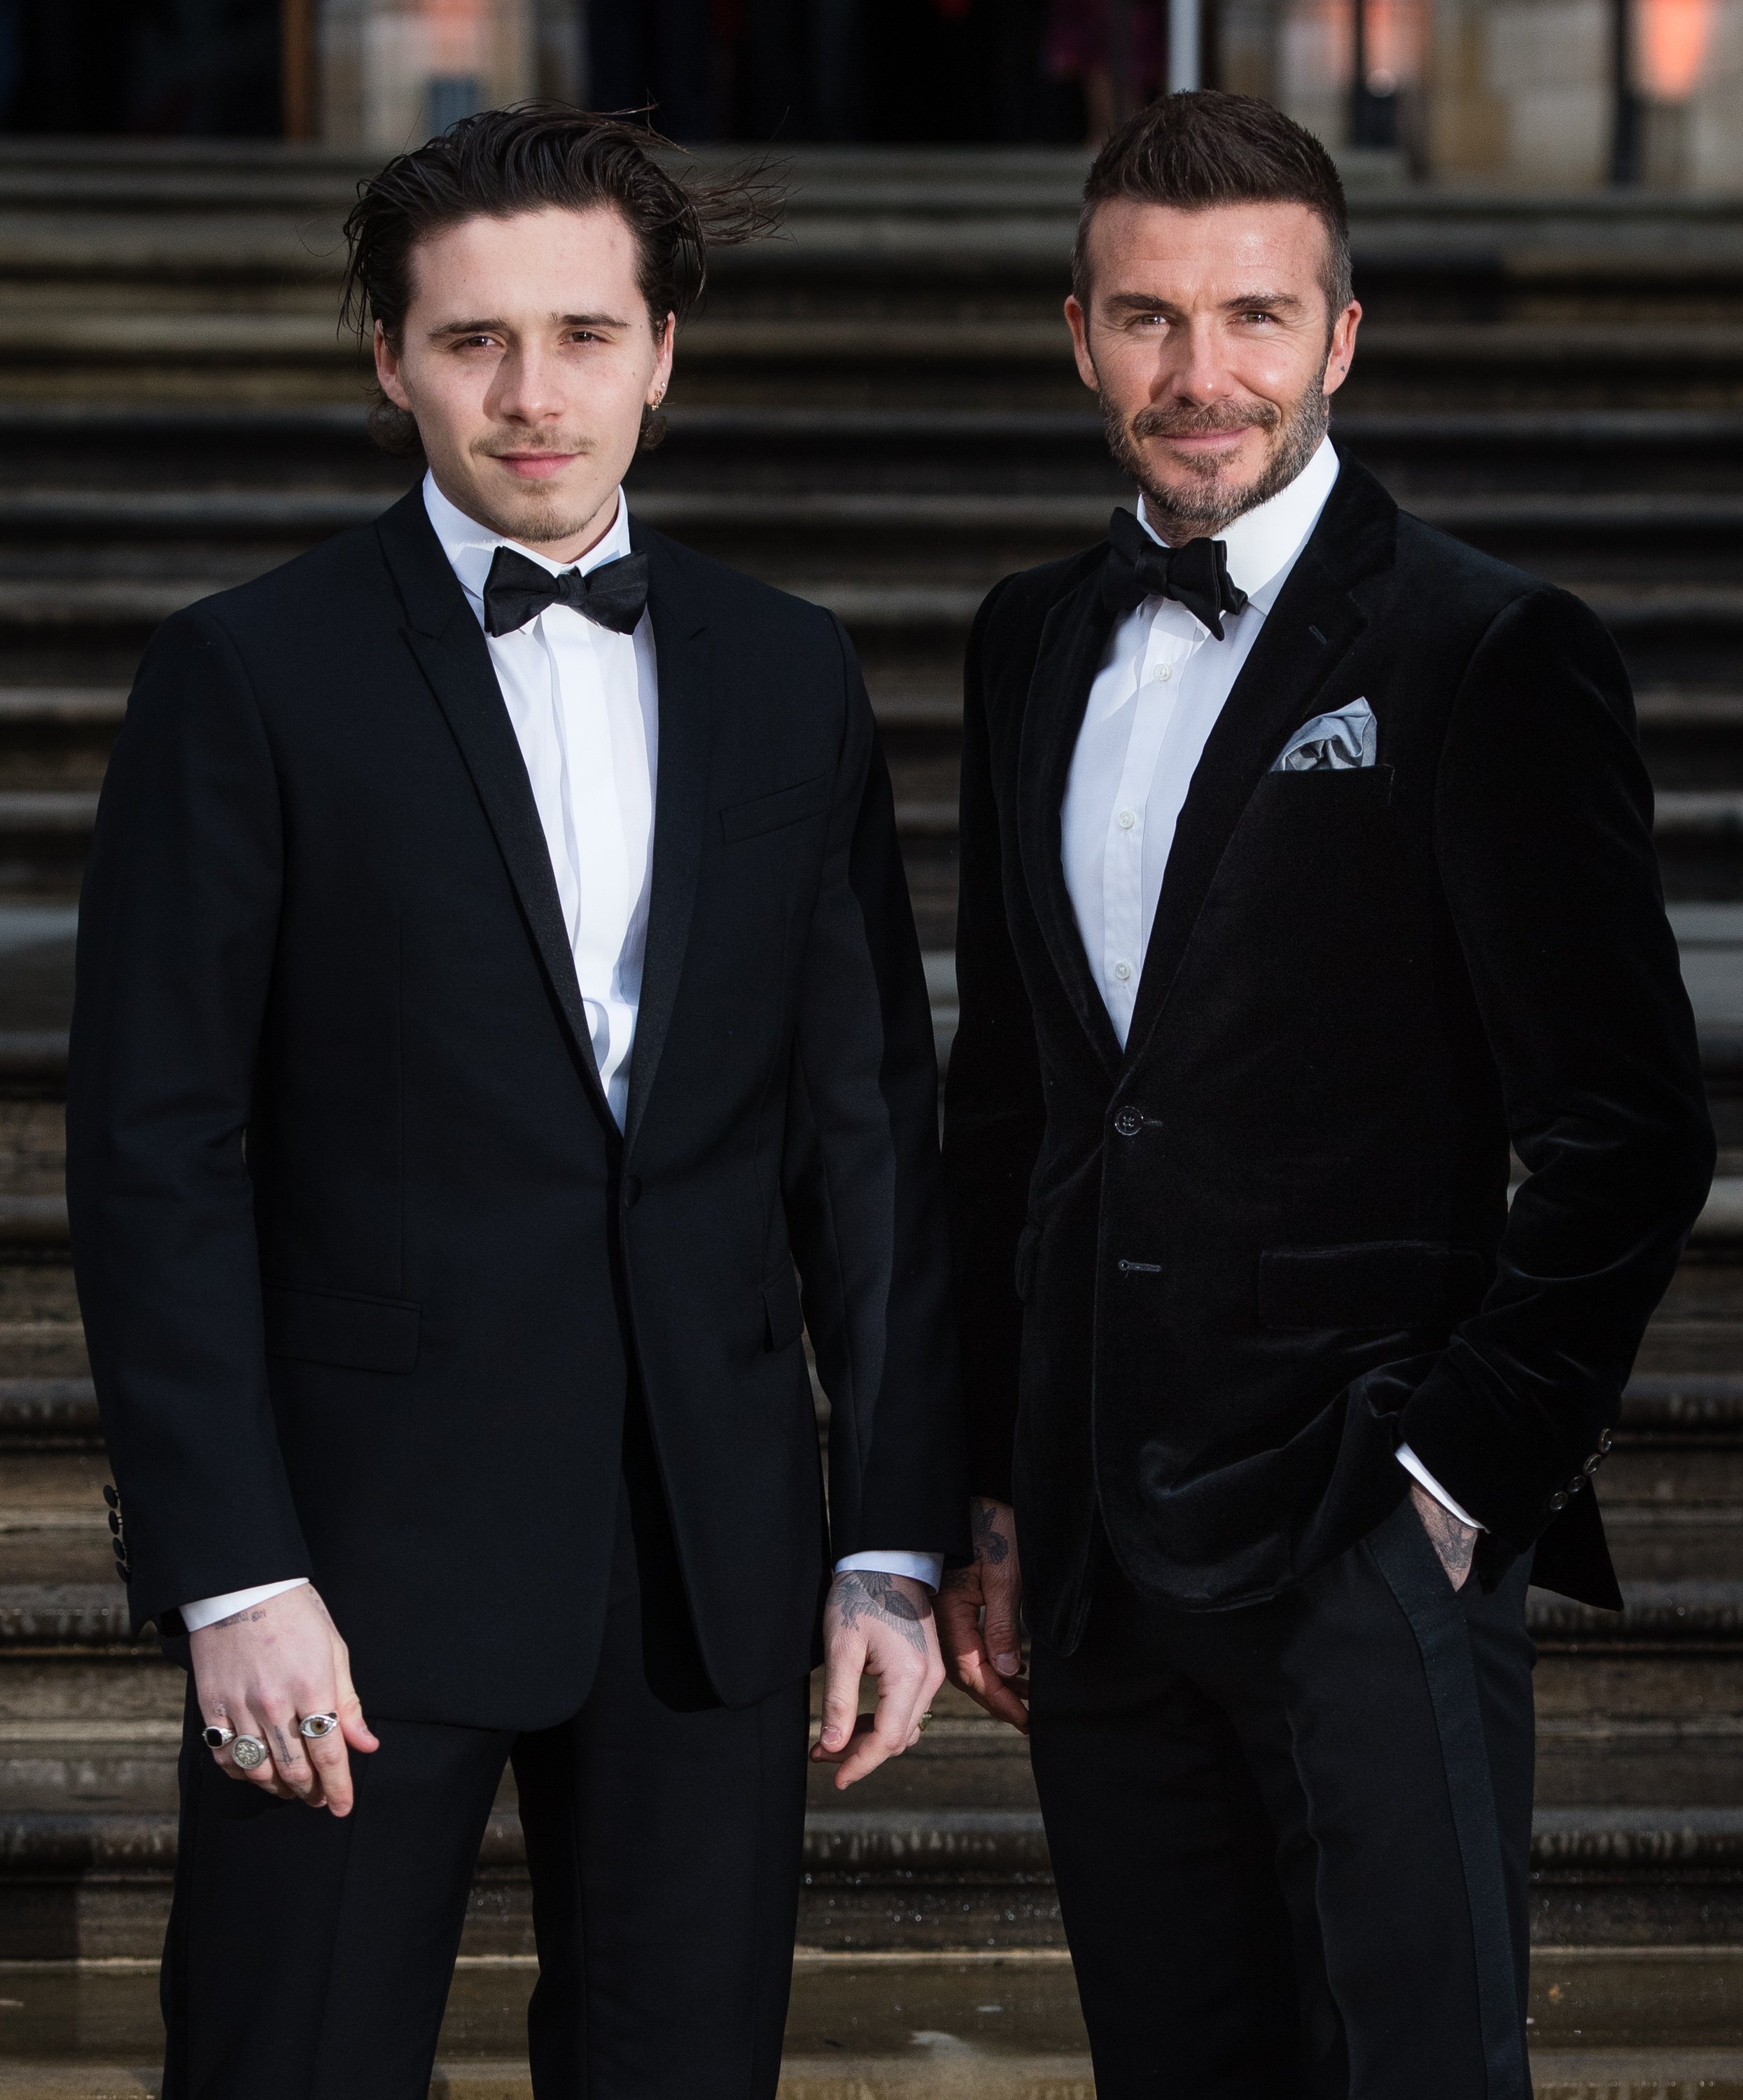 Brooklyn Beckham and David Beckham attend the "Our Planet" global premiere at Natural History Museum on April 04, 2019 in London, England. | Source: Getty Images